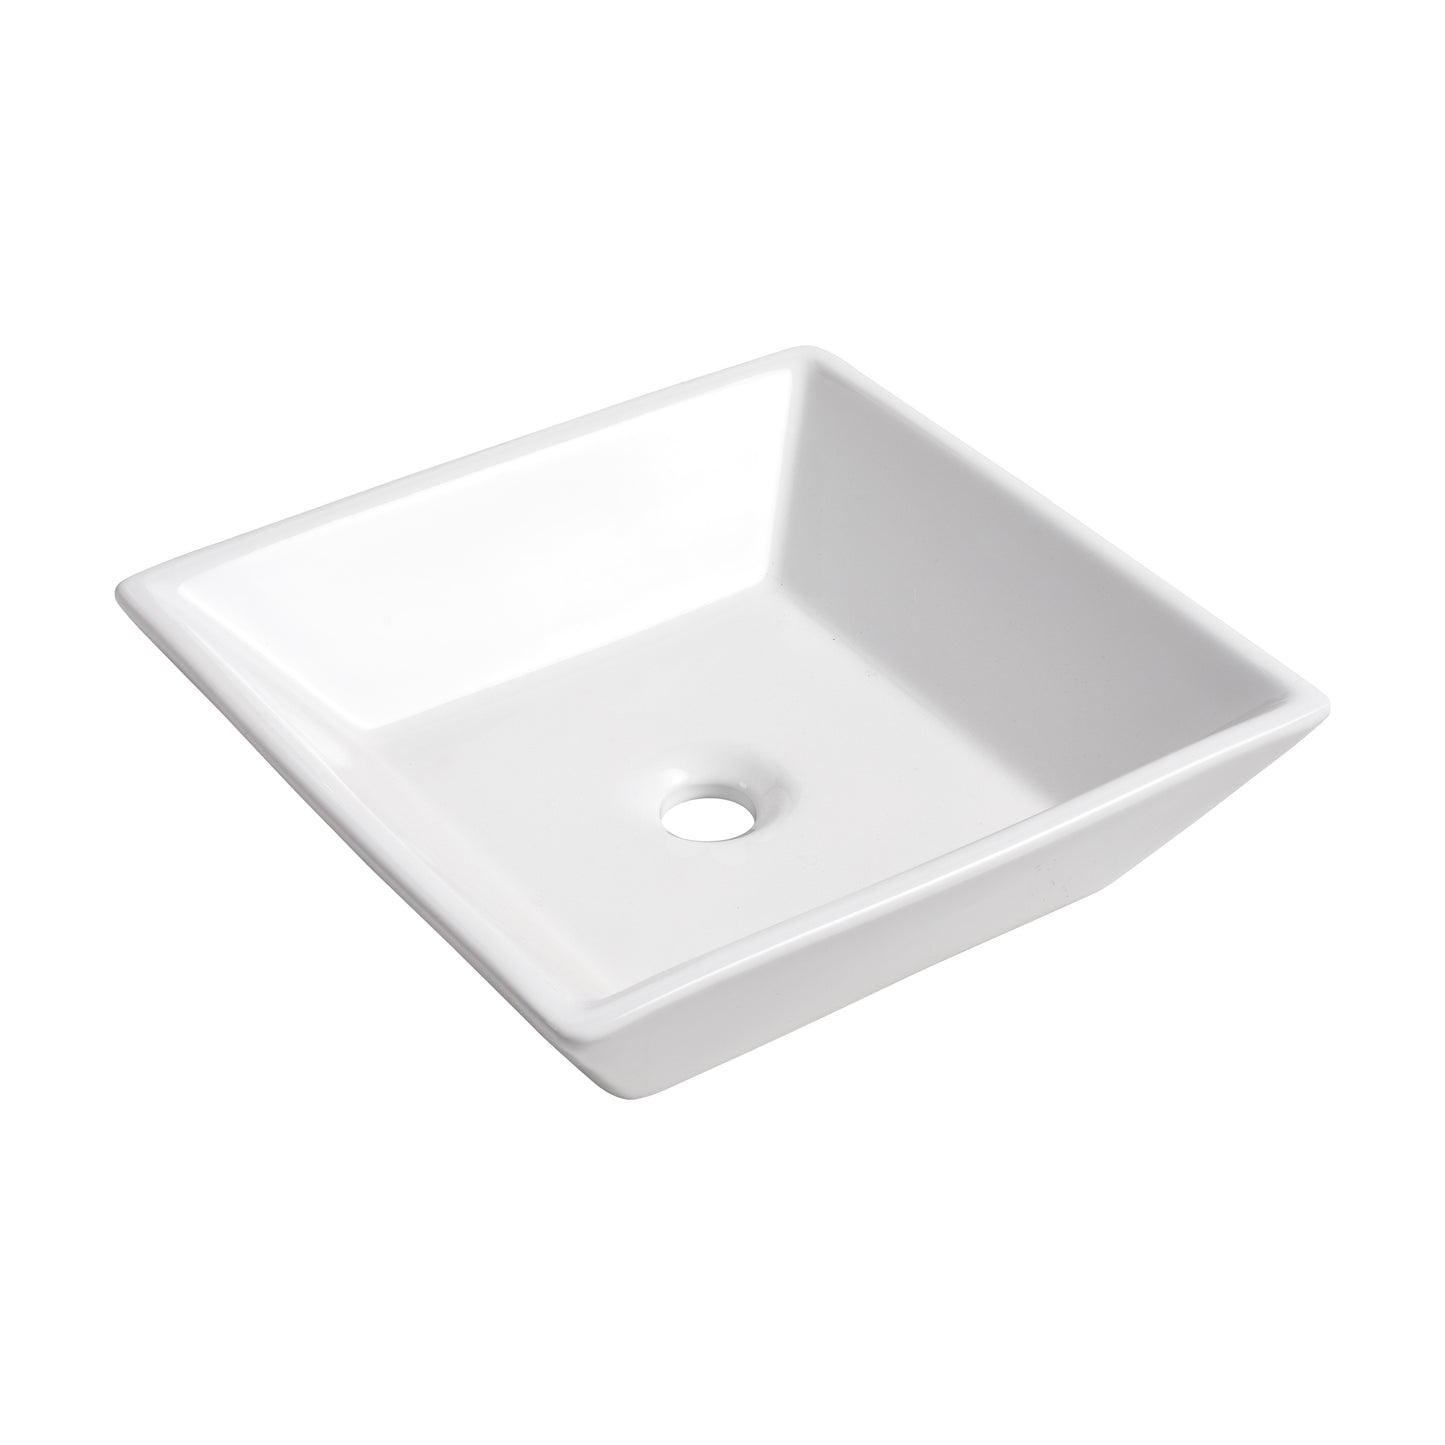 24 " Modern Design Float Bathroom Vanity With Ceramic Basin Set,  Wall Mounted White Oak Vanity  With Soft Close Door,KD-Packing，KD-Packing，2 Pieces Parcel（TOP-BAB101MOWH）